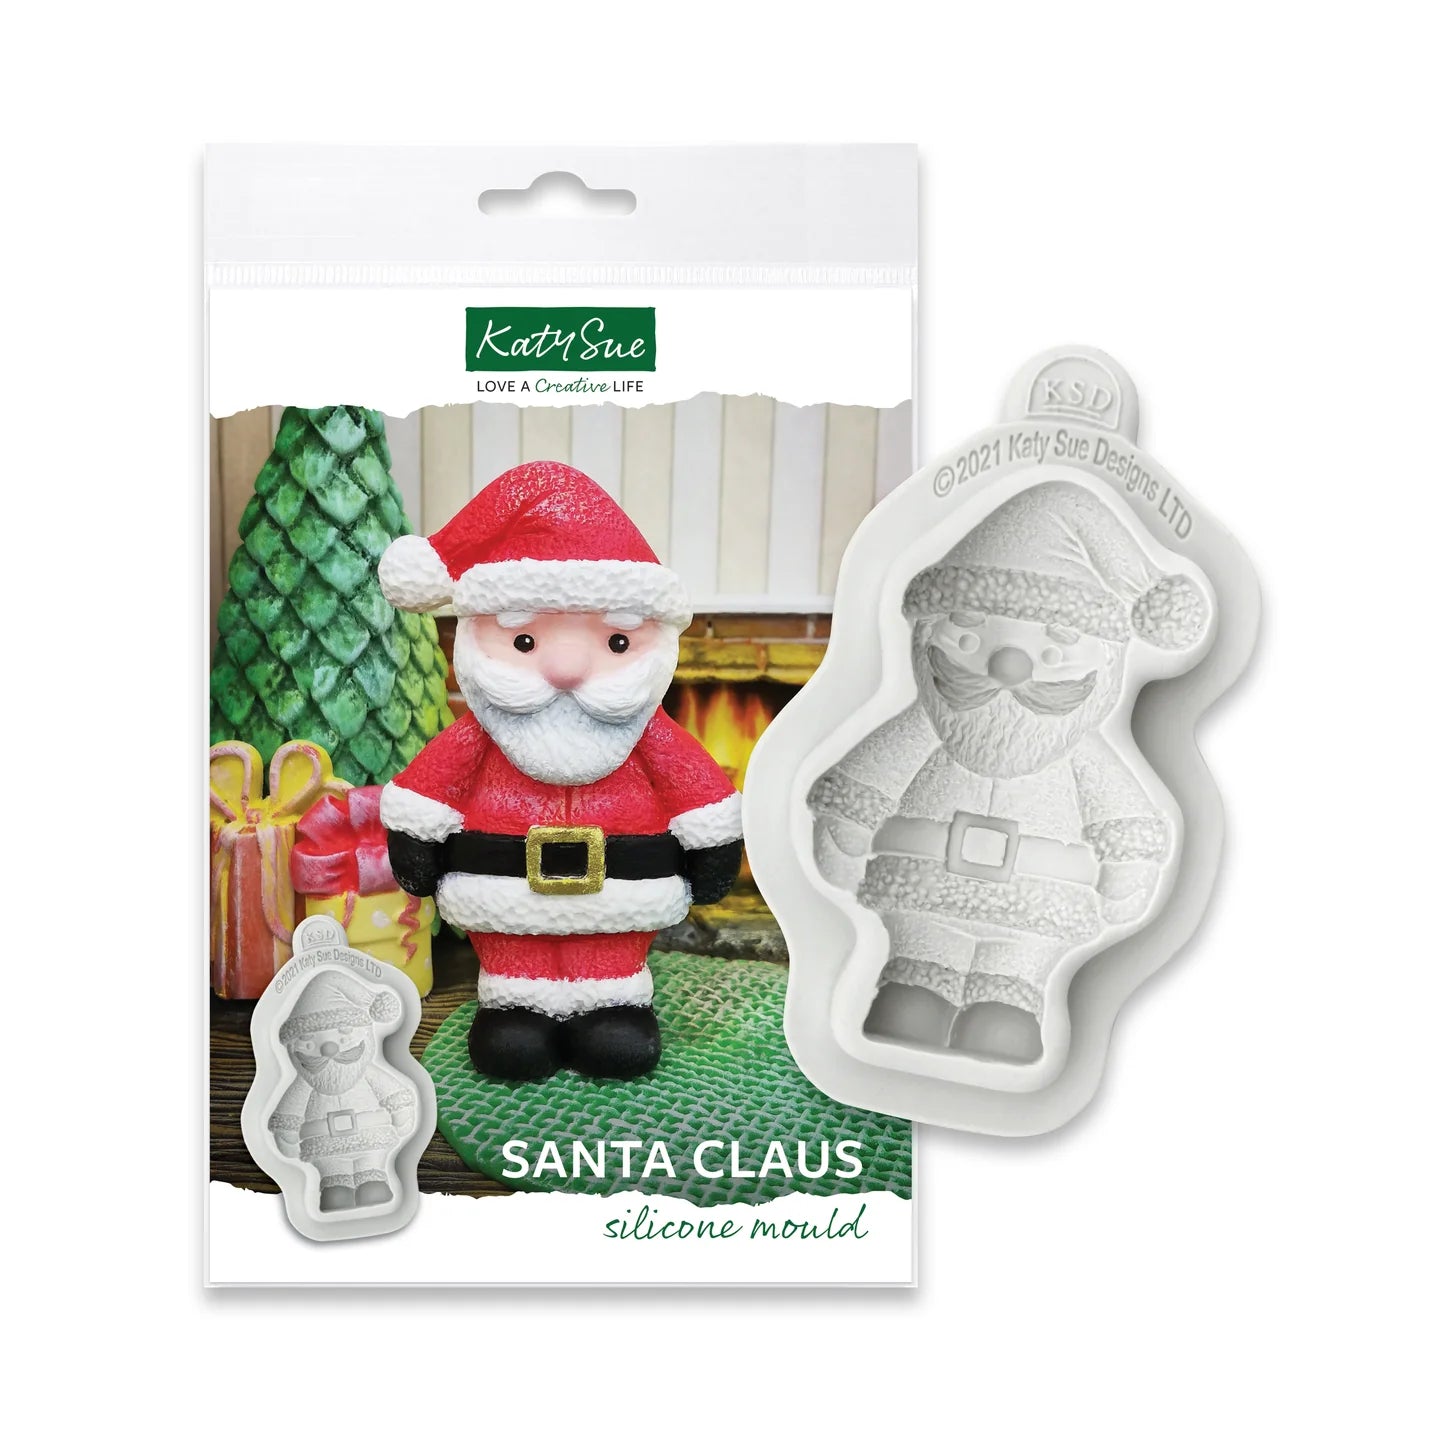 Katy Sue Nutcracker Silicone Mold for Christmas Cake Decorating & Crafts -  Mold Size 4.3 Inch Tall x 1.4 Inch Wide